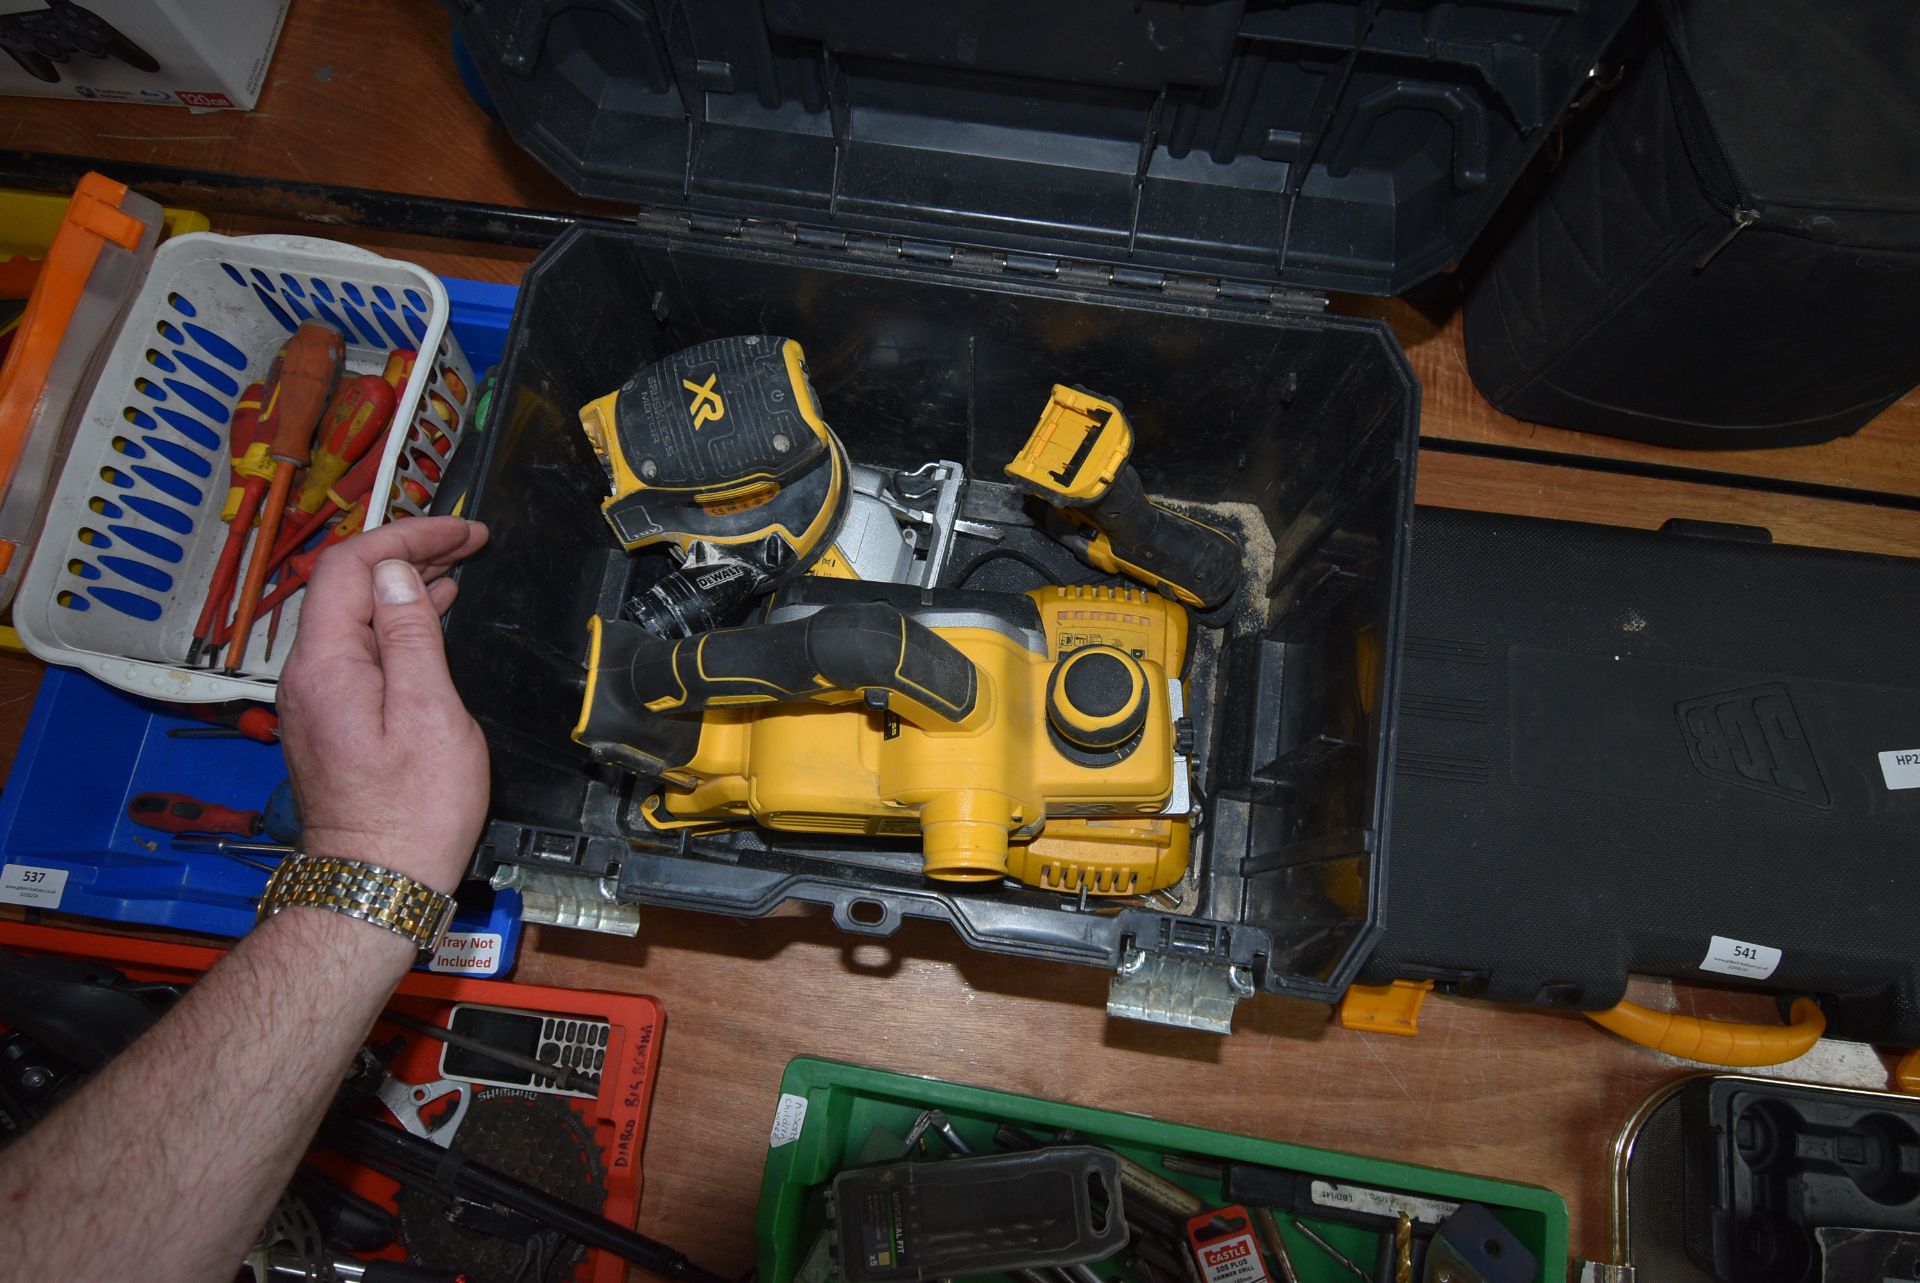 Four Dewalt Battery Operated Tools: Jig Saw, Palm Sander, Driver, and Planer (no batteries) with